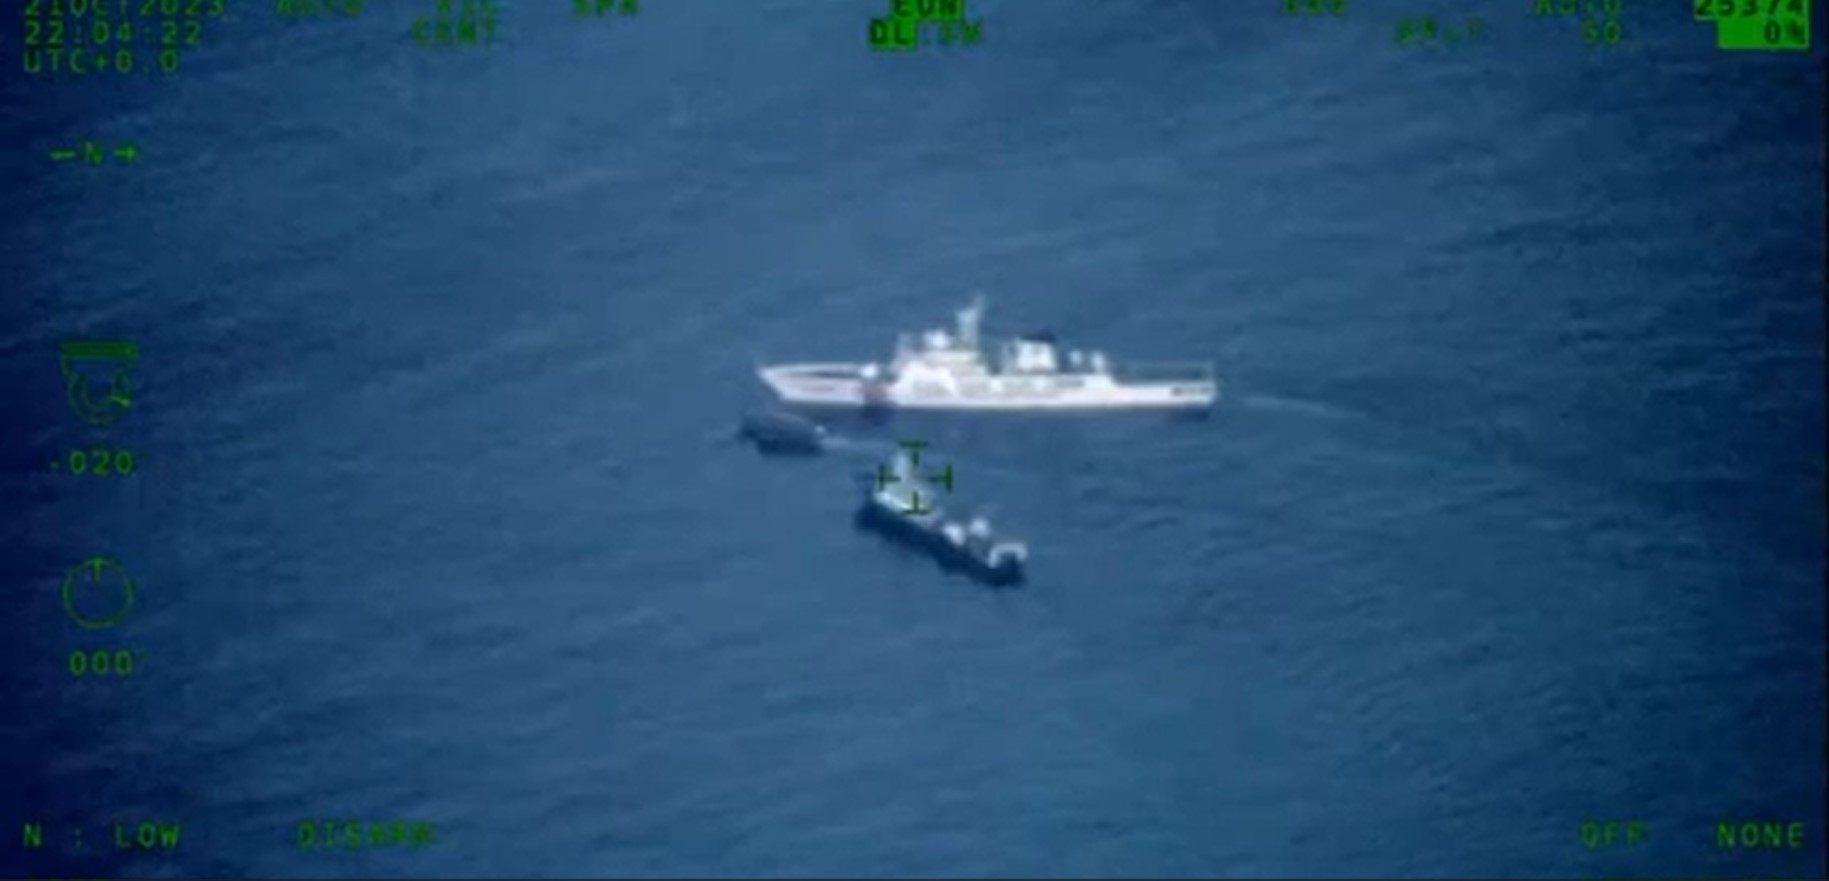 ‘DANGEROUS, IRRESPONSIBLE’ In this screenshot of a video taken by the Armed Forces of the Philippines some 2 kilometers east of Ayungin (Second Thomas) Shoal, China Coast Guard Vessel No. 5203 blocks a boat contracted by the AFP for a resupply mission on Sunday morning in that area of the West Philippine Sea.